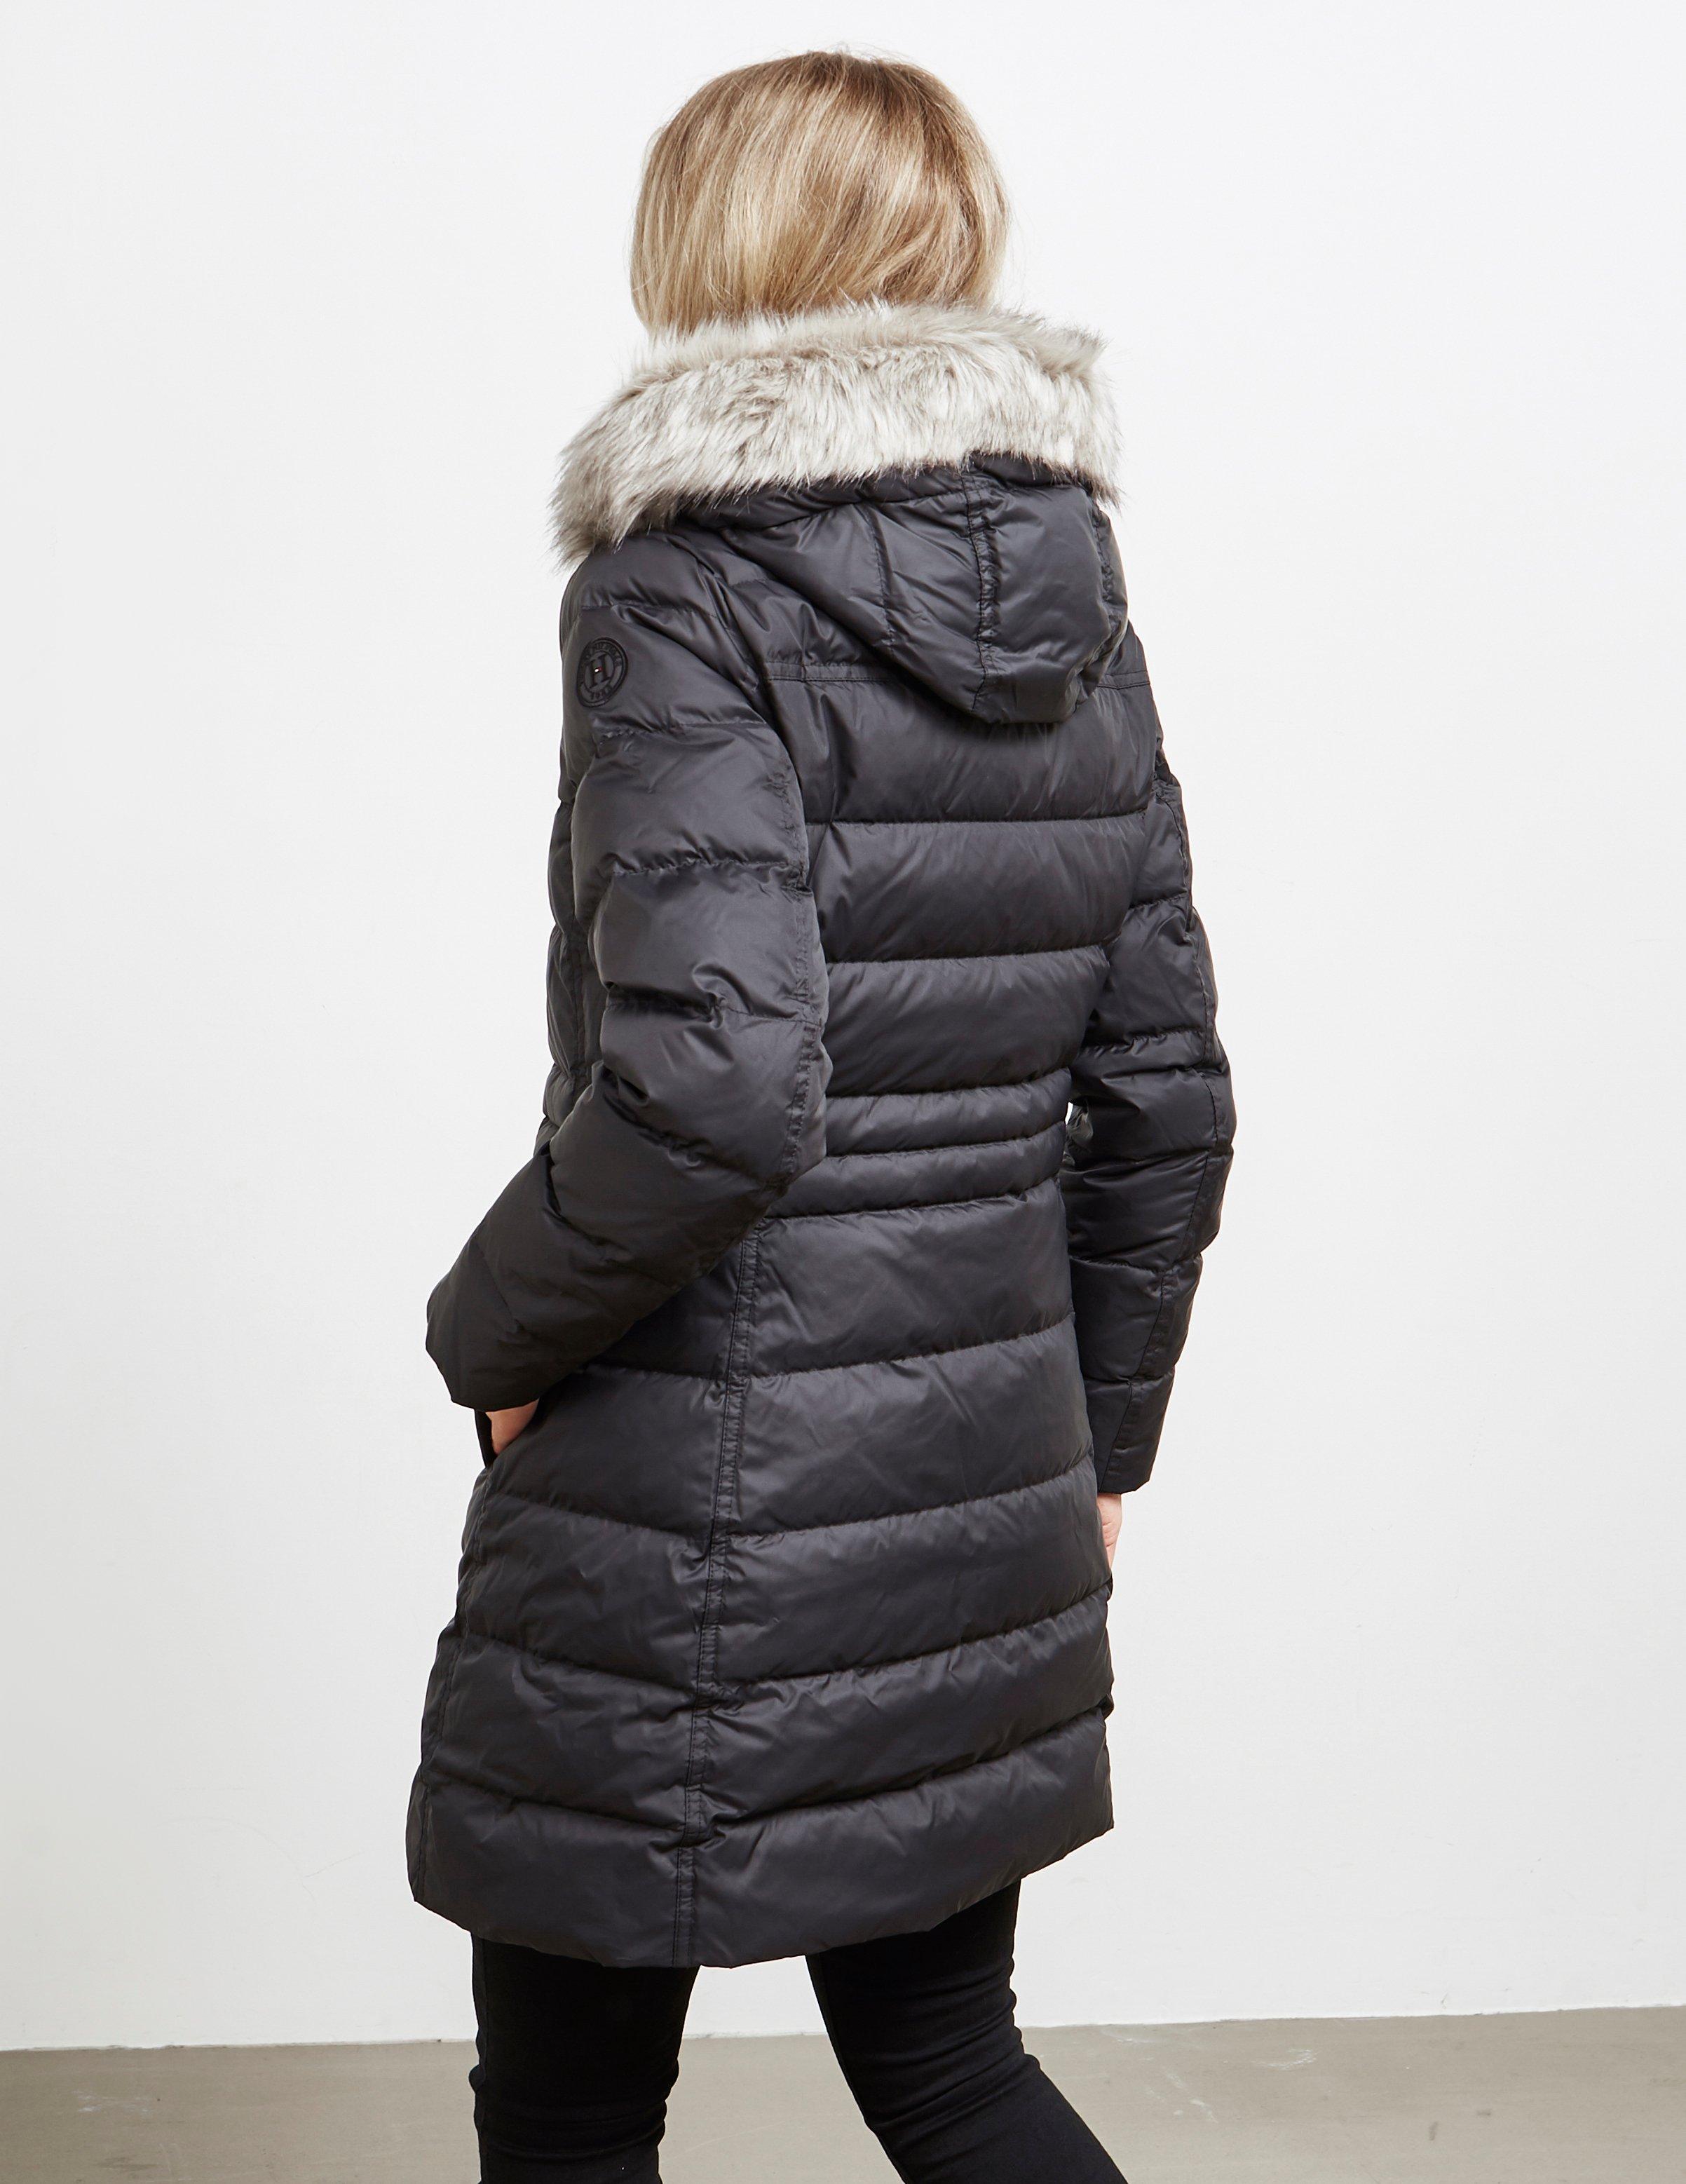 Tommy Hilfiger Tyra Down Coat Wholesale Discount, 44% OFF |  deliciousgreek.ca